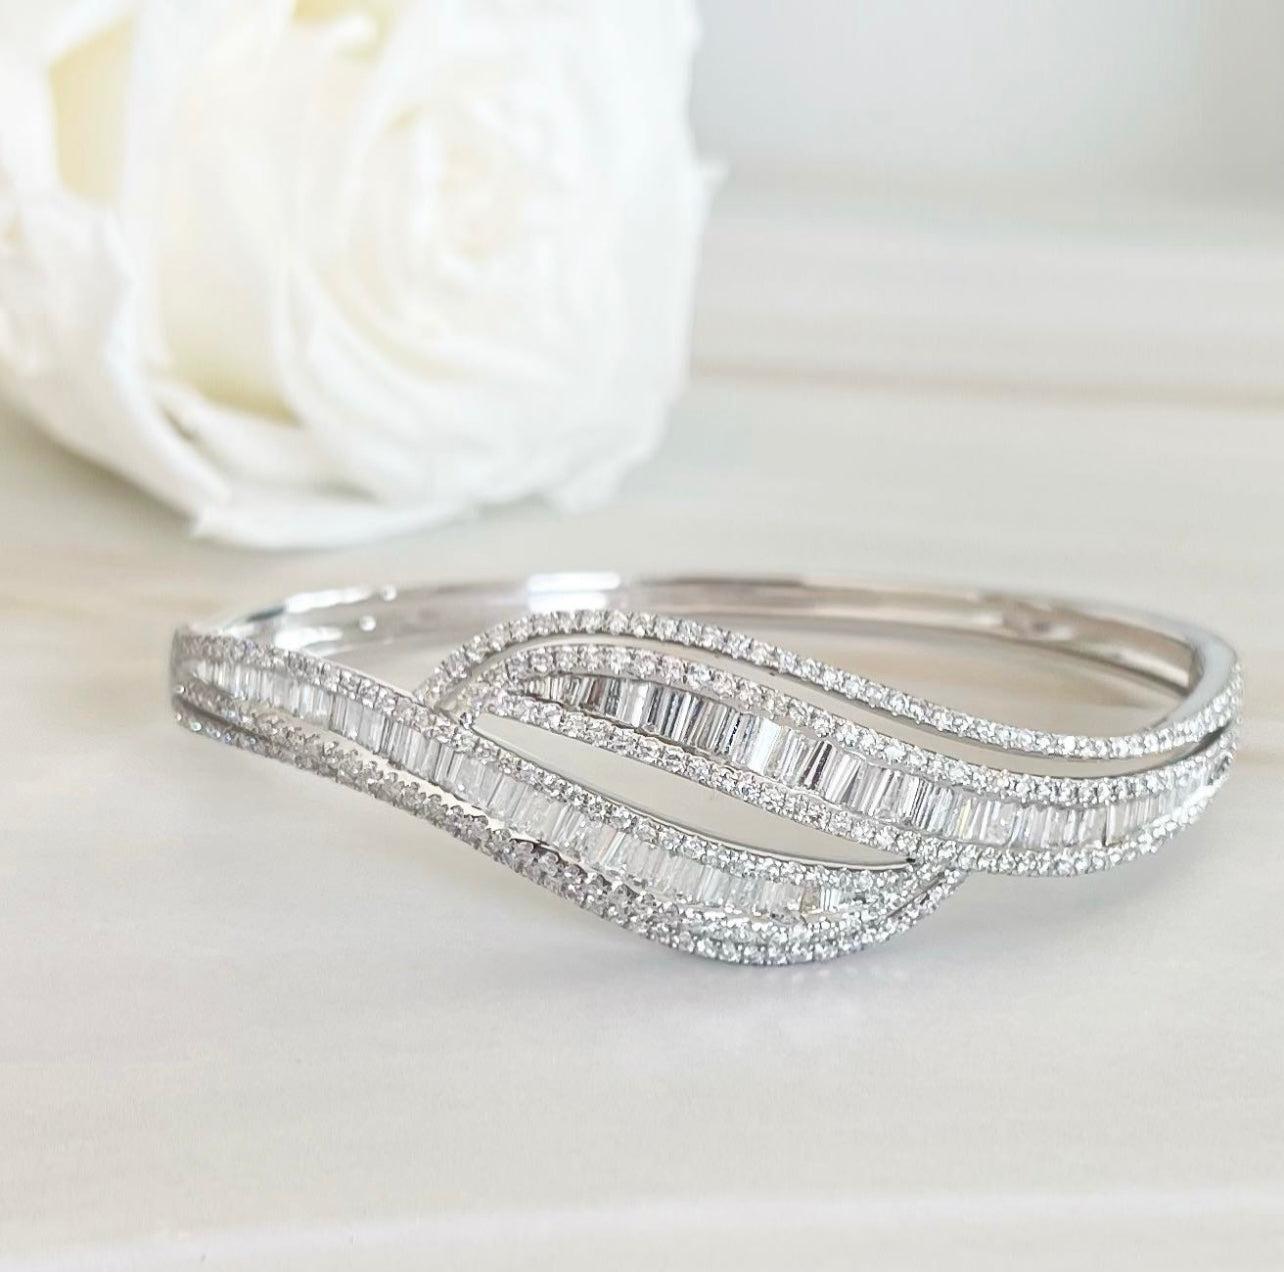 'Diana' 18CT White Gold Diamond Bangle In New Condition For Sale In Sydney, NSW